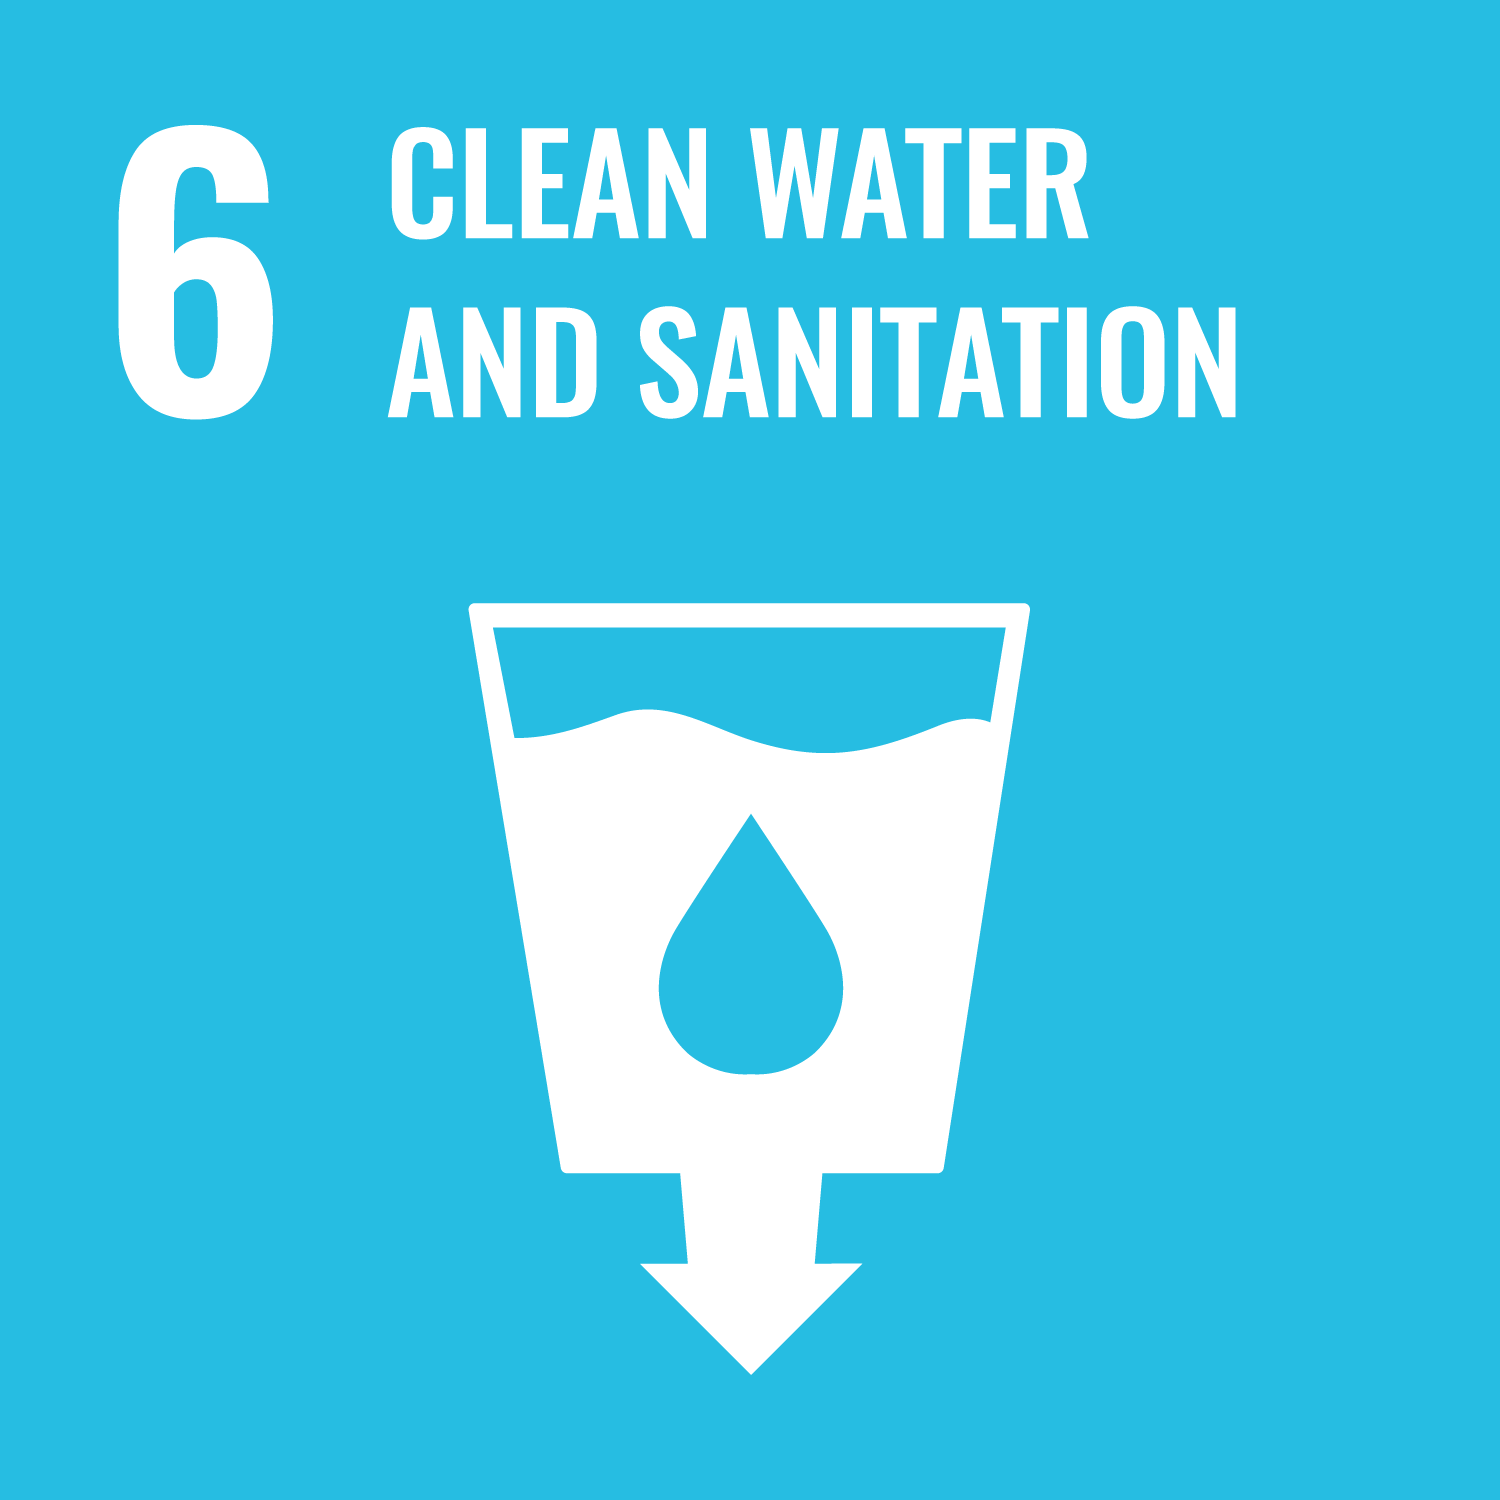 ［Goal 6］ Clean Water and Sanitation